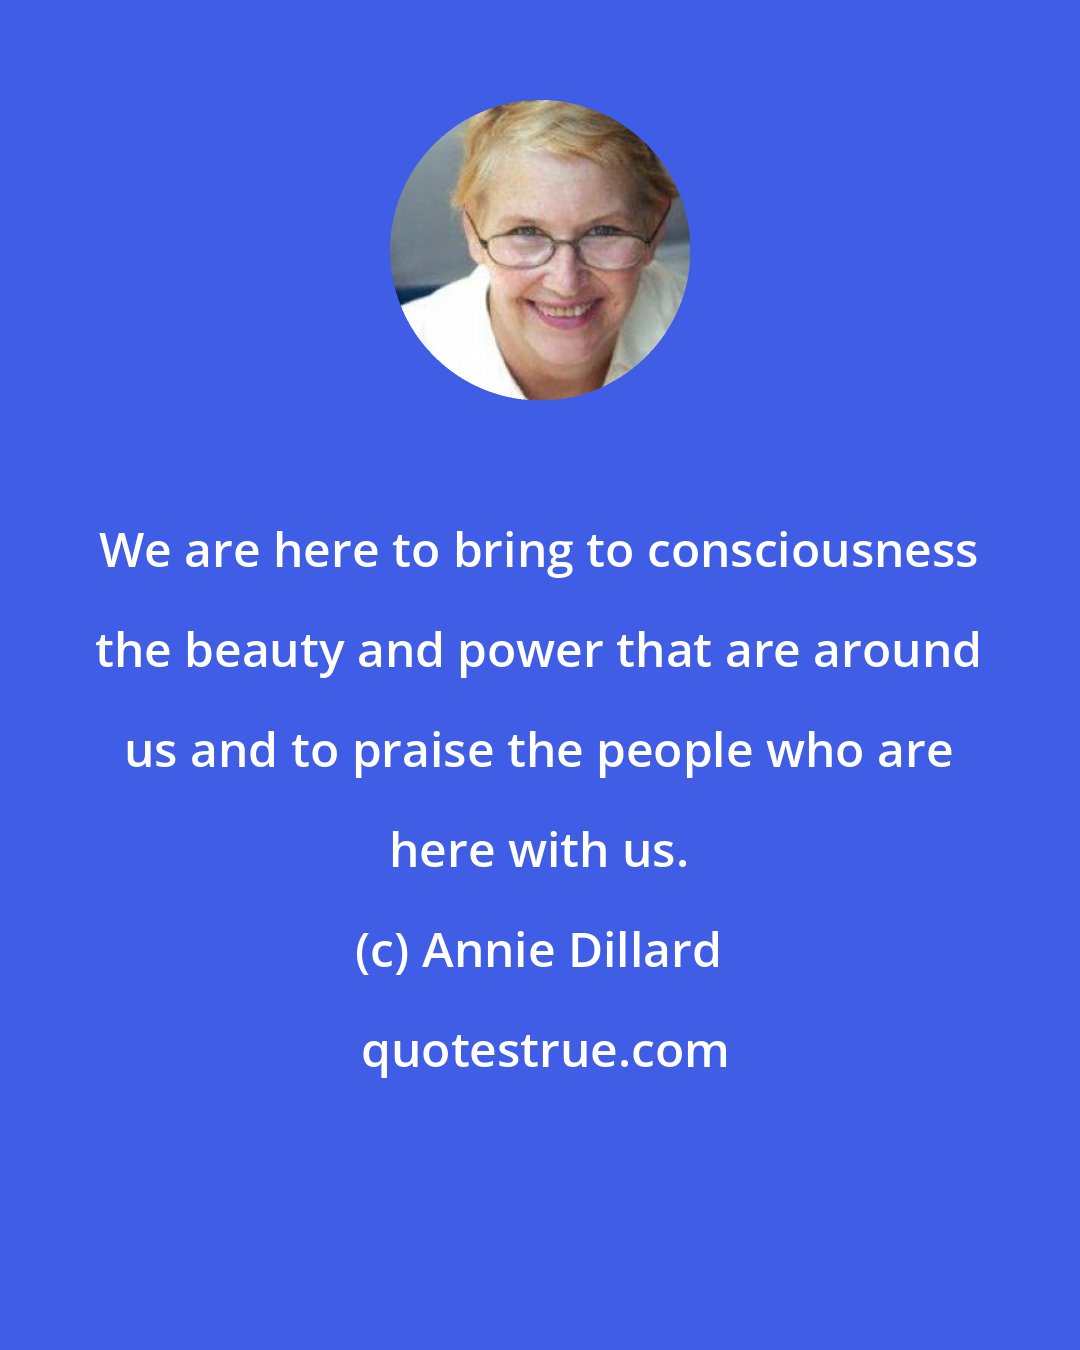 Annie Dillard: We are here to bring to consciousness the beauty and power that are around us and to praise the people who are here with us.